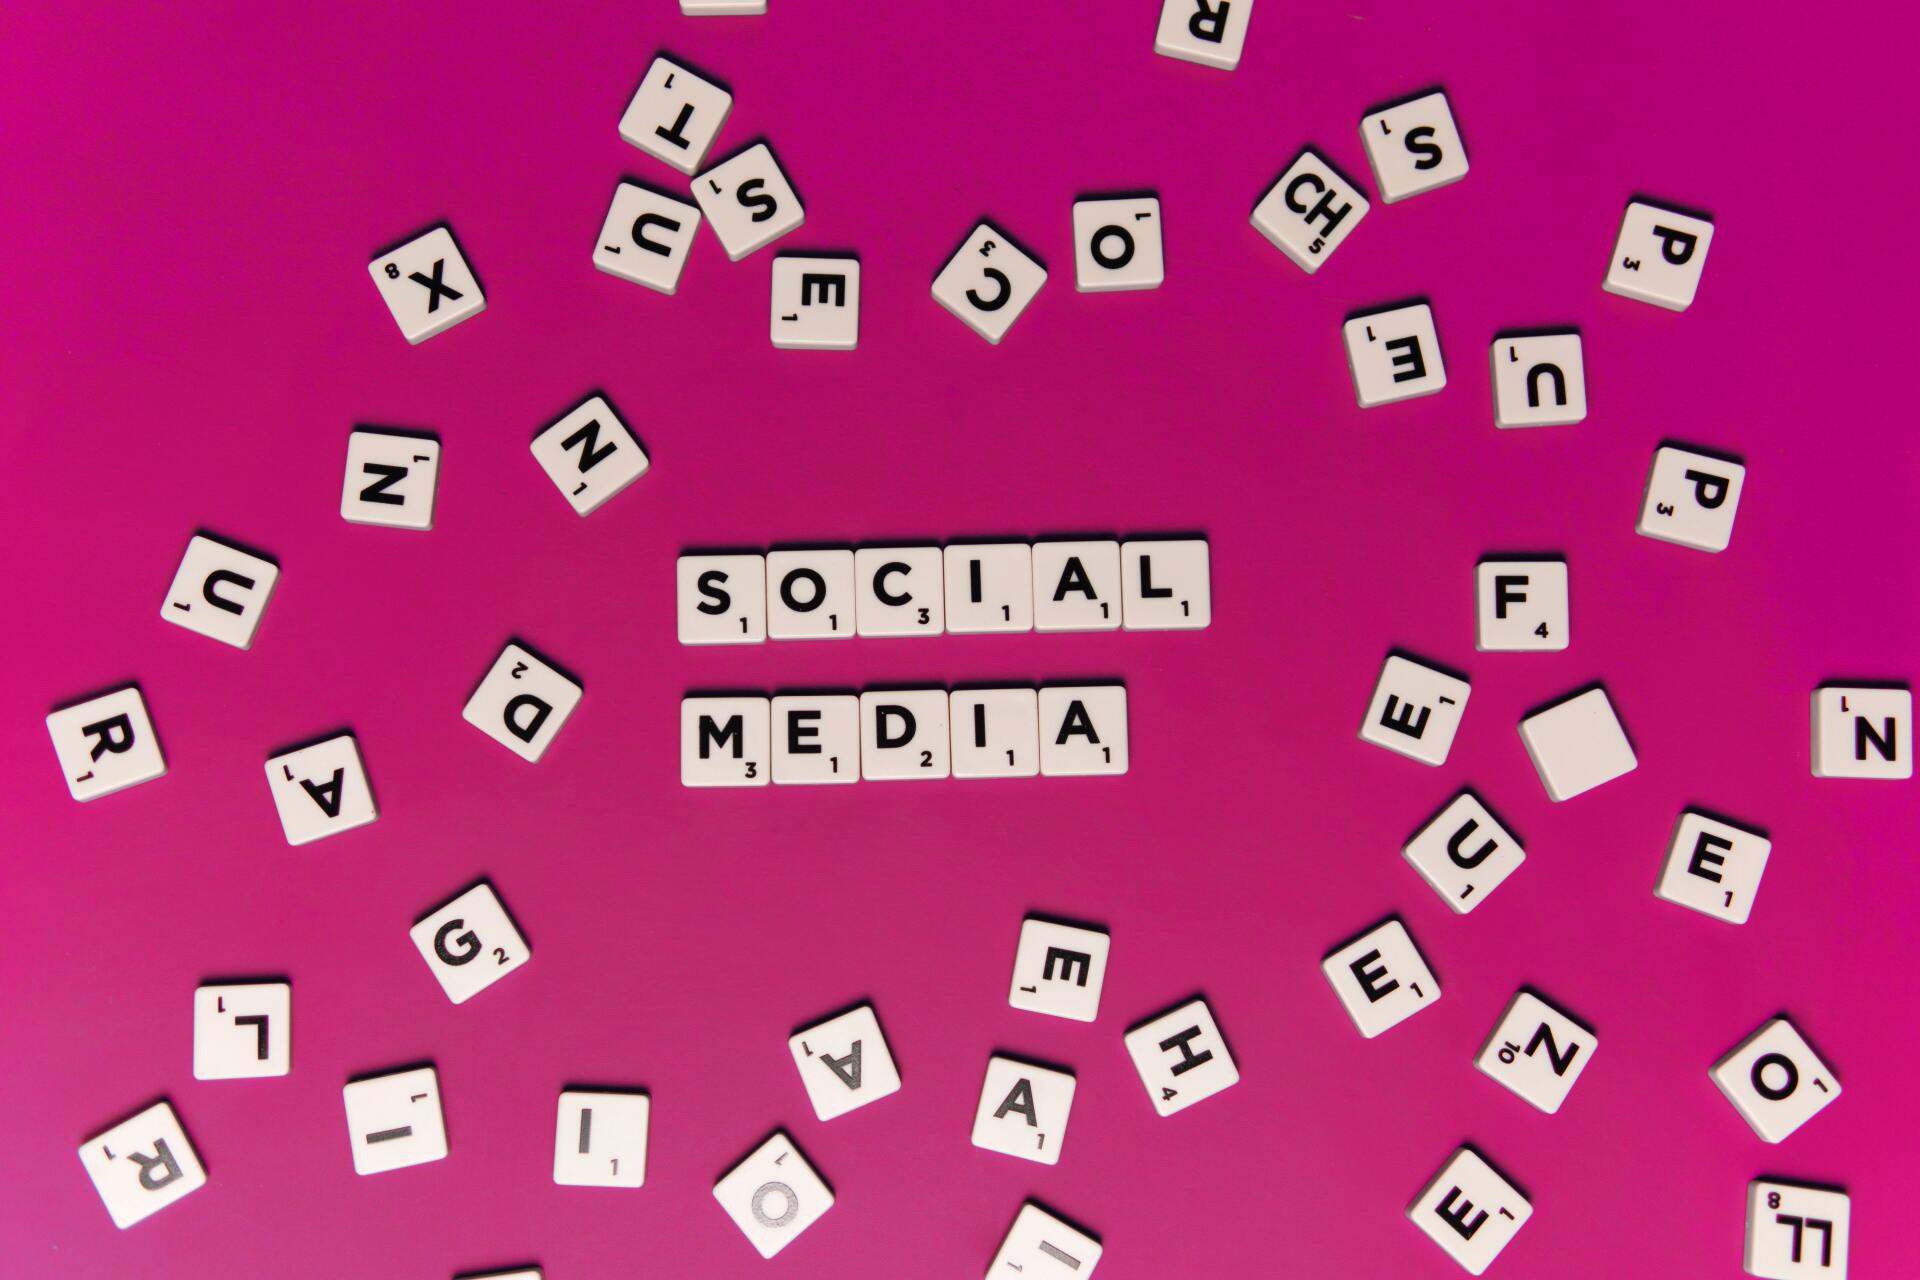 social media words written as scrabble letters over pink background